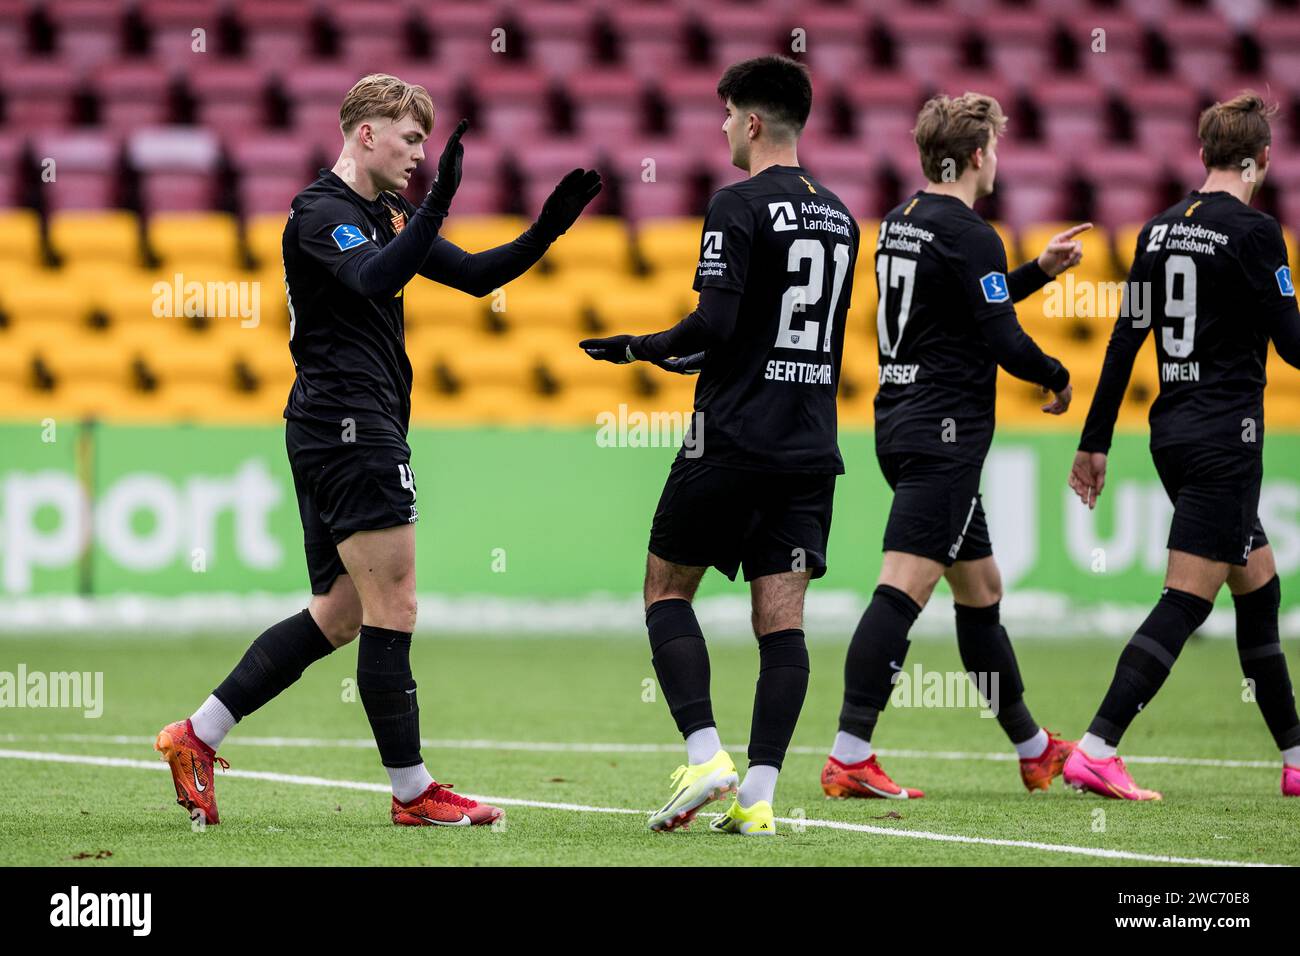 Farum, Denmark. 13th, January 2024. Conrad Harder (40) of FC Nordsjaelland scores and celebrates with Zidan Sertdemir (21) during a test match between FC Nordsjaelland and B.93 at Right to Dream Park in Farum. (Photo credit: Gonzales Photo - Lasse Lagoni). Stock Photo